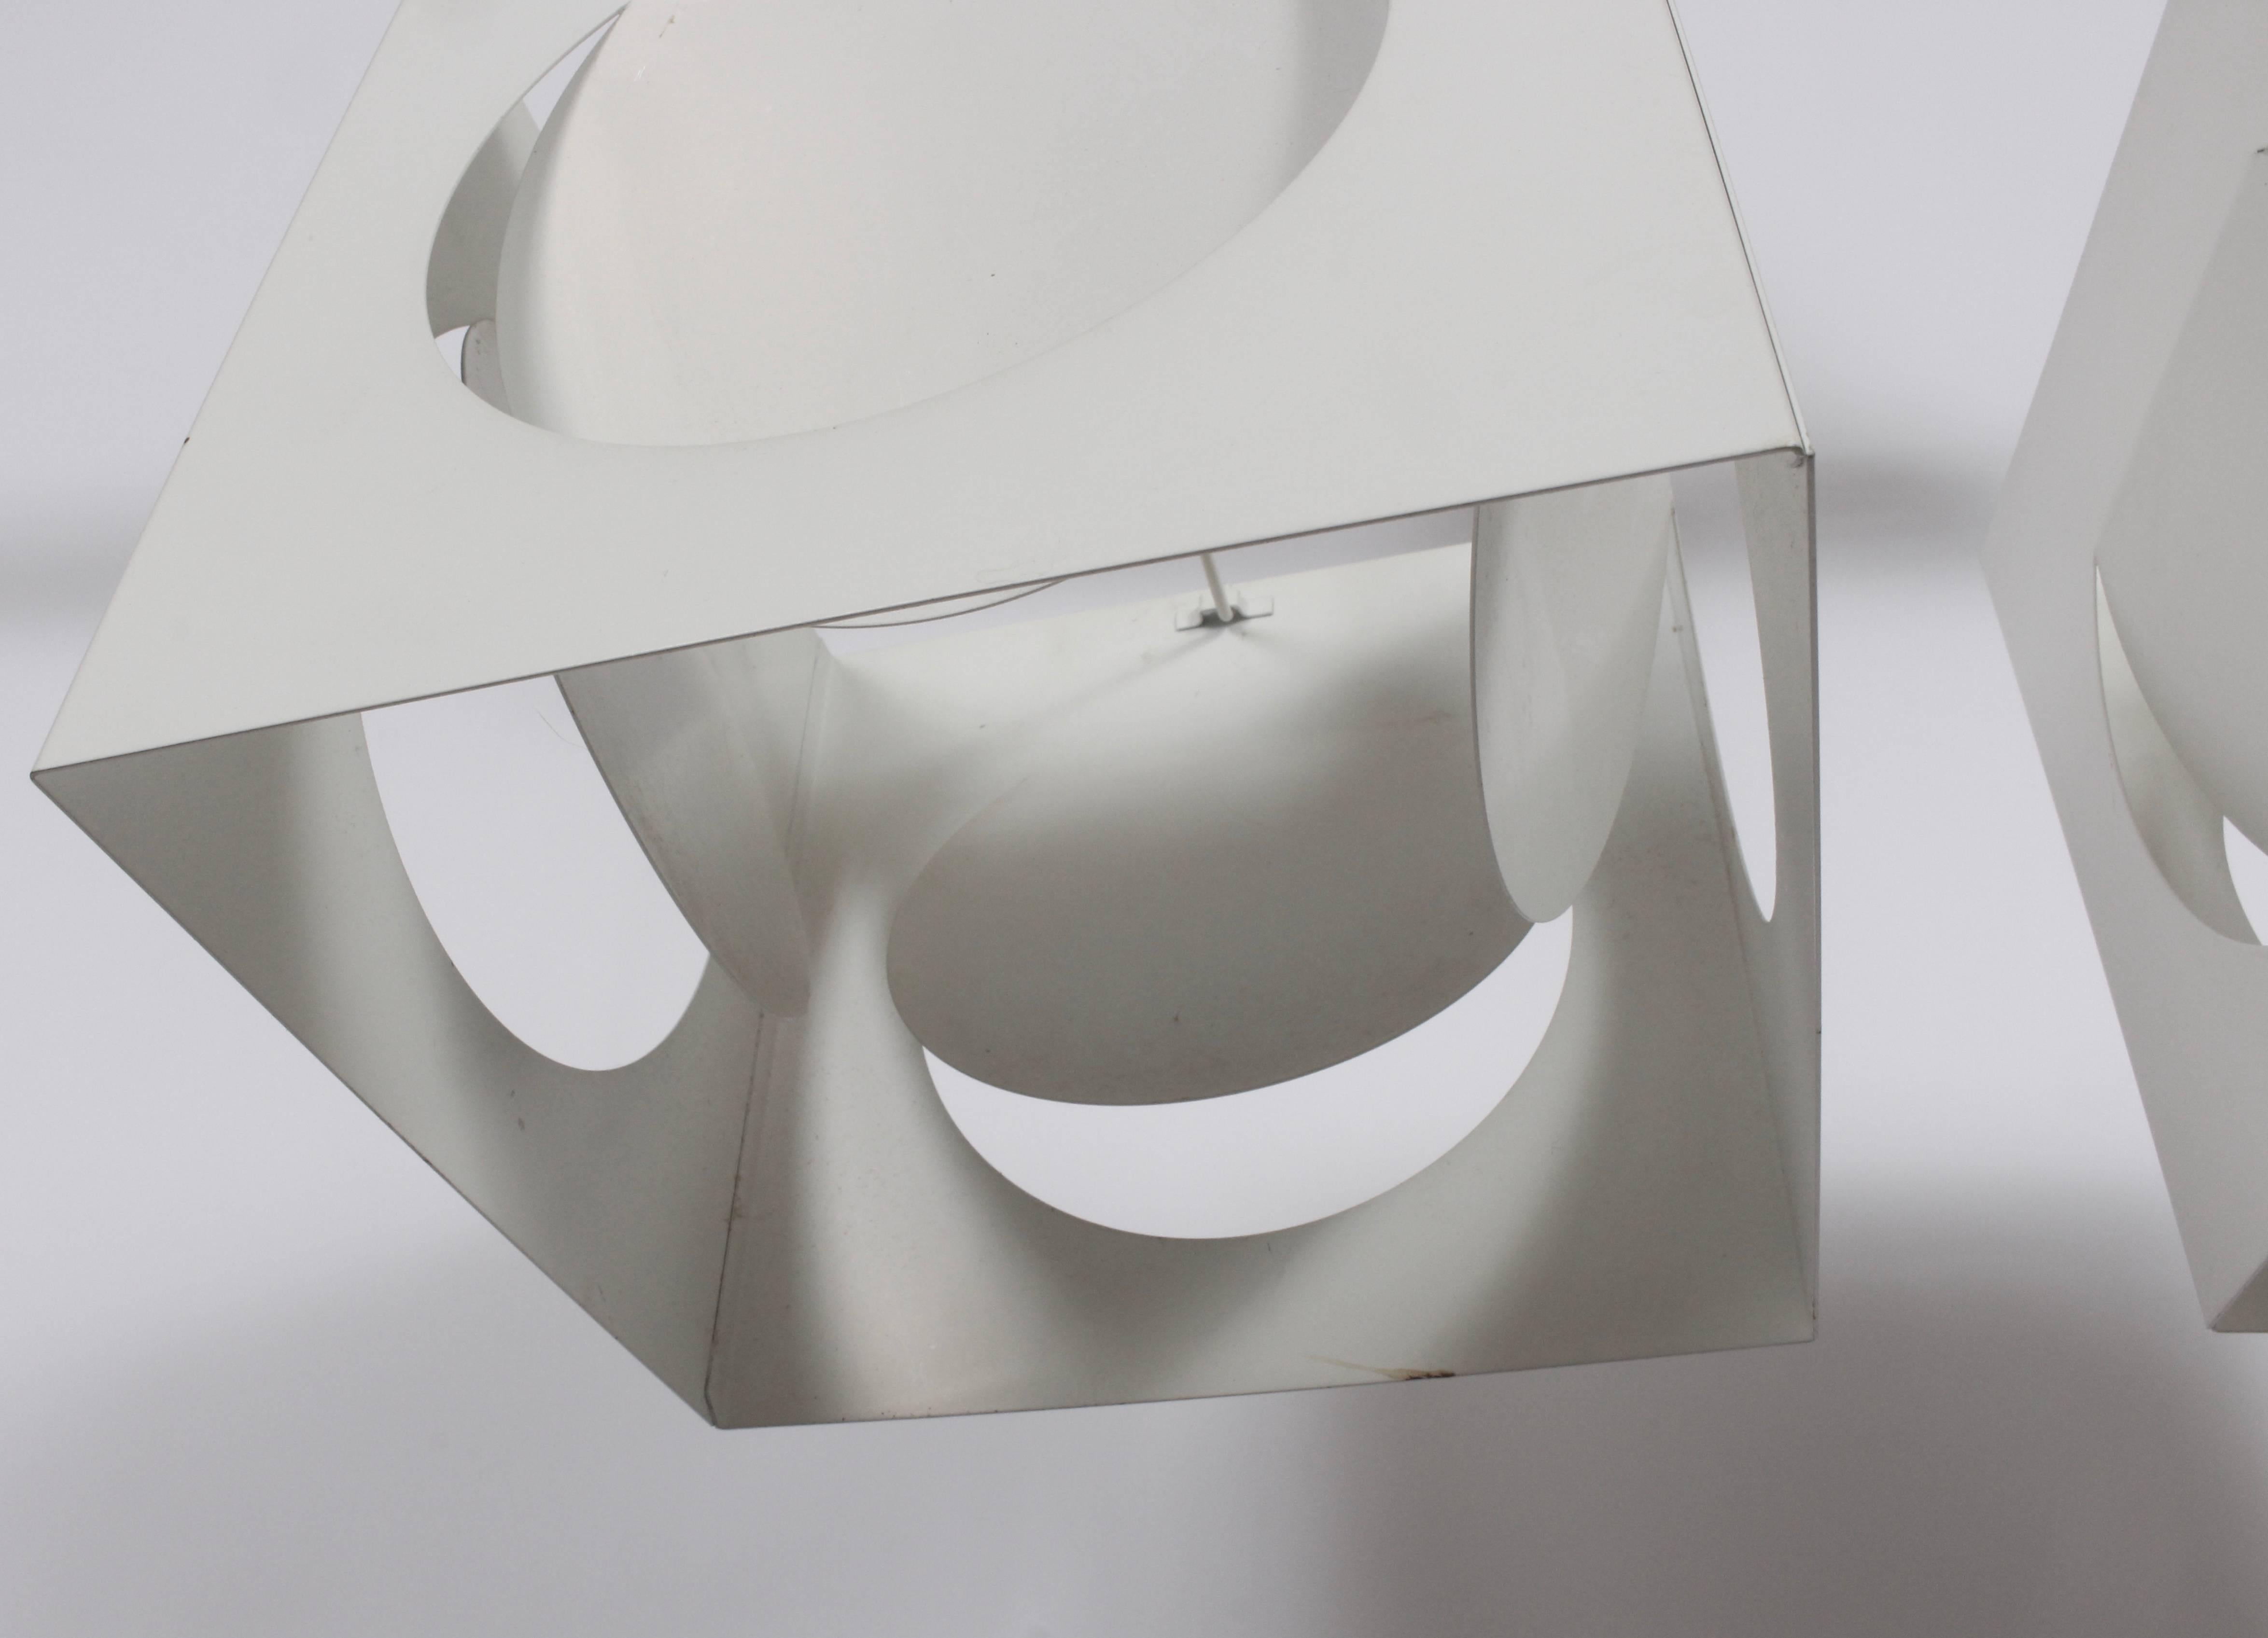 Painted Pair of Shogo Suzuki for Stockmann Orno White Metal Cube Hanging Lamps, 1960s For Sale